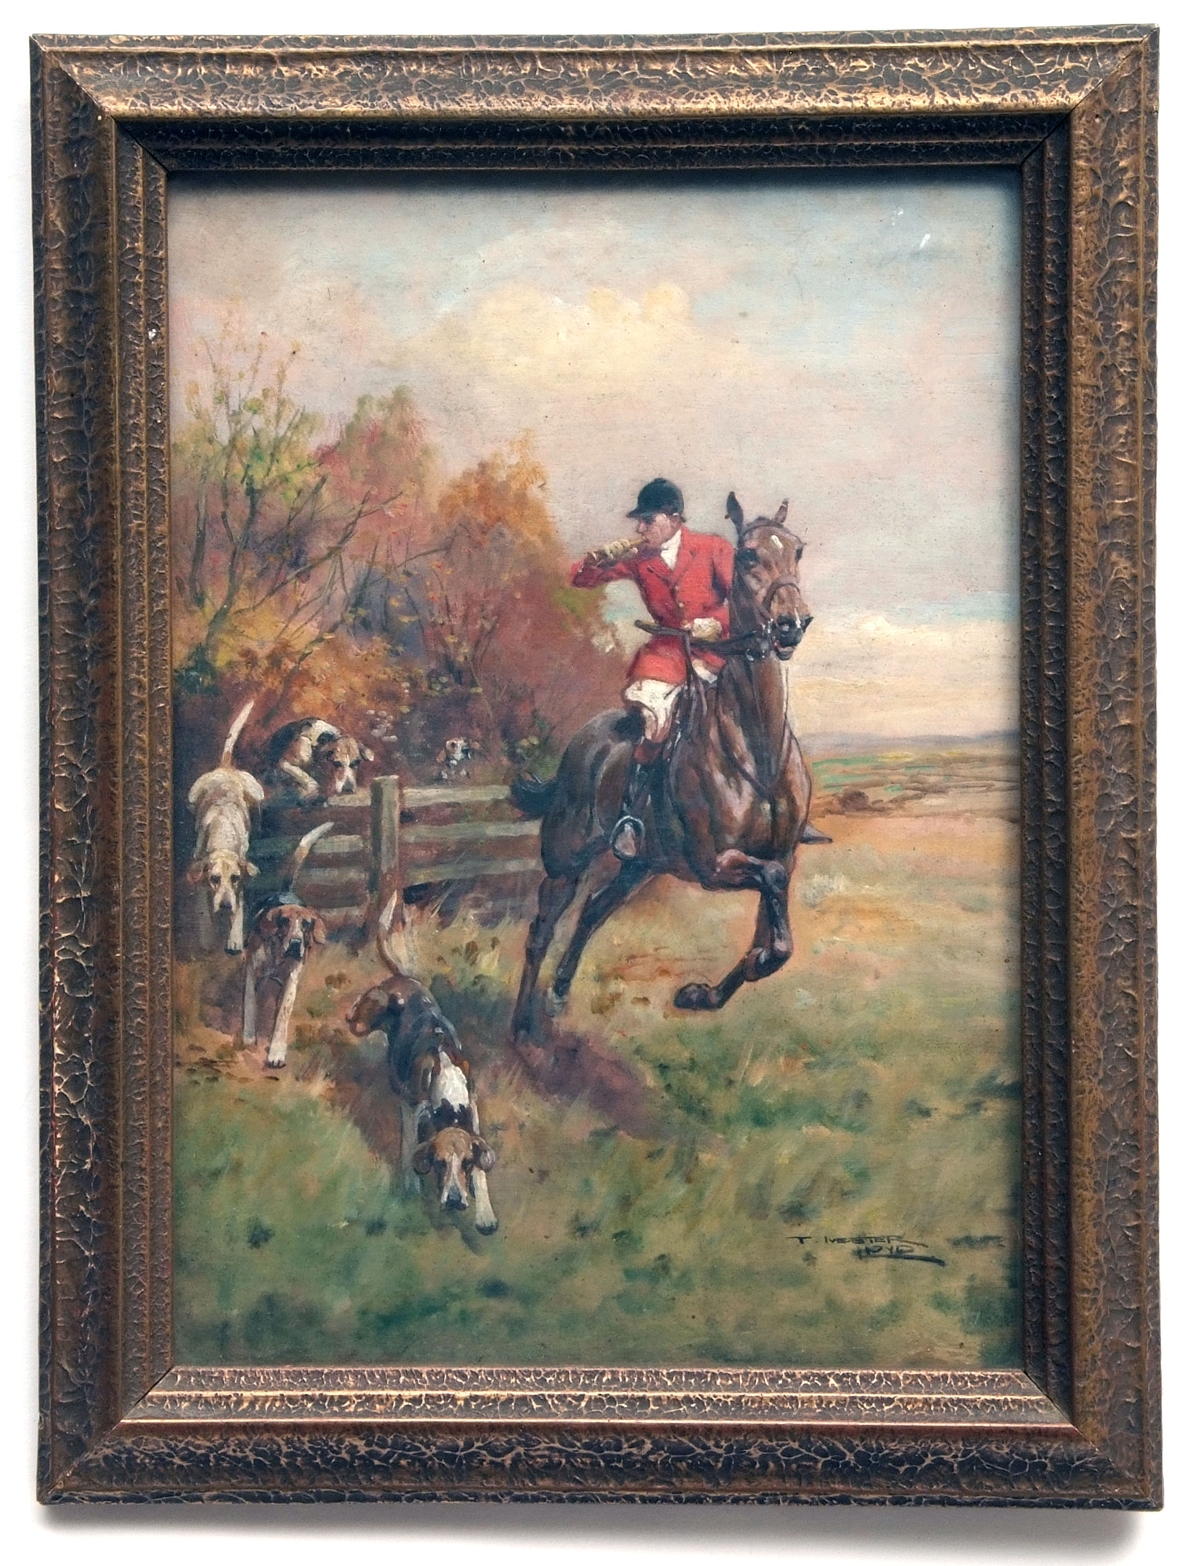 THOMAS IVESTER LLOYD, (1873-1942, BRITISH)  Hunting Scene  watercolour, signed lower right  13 x 9½